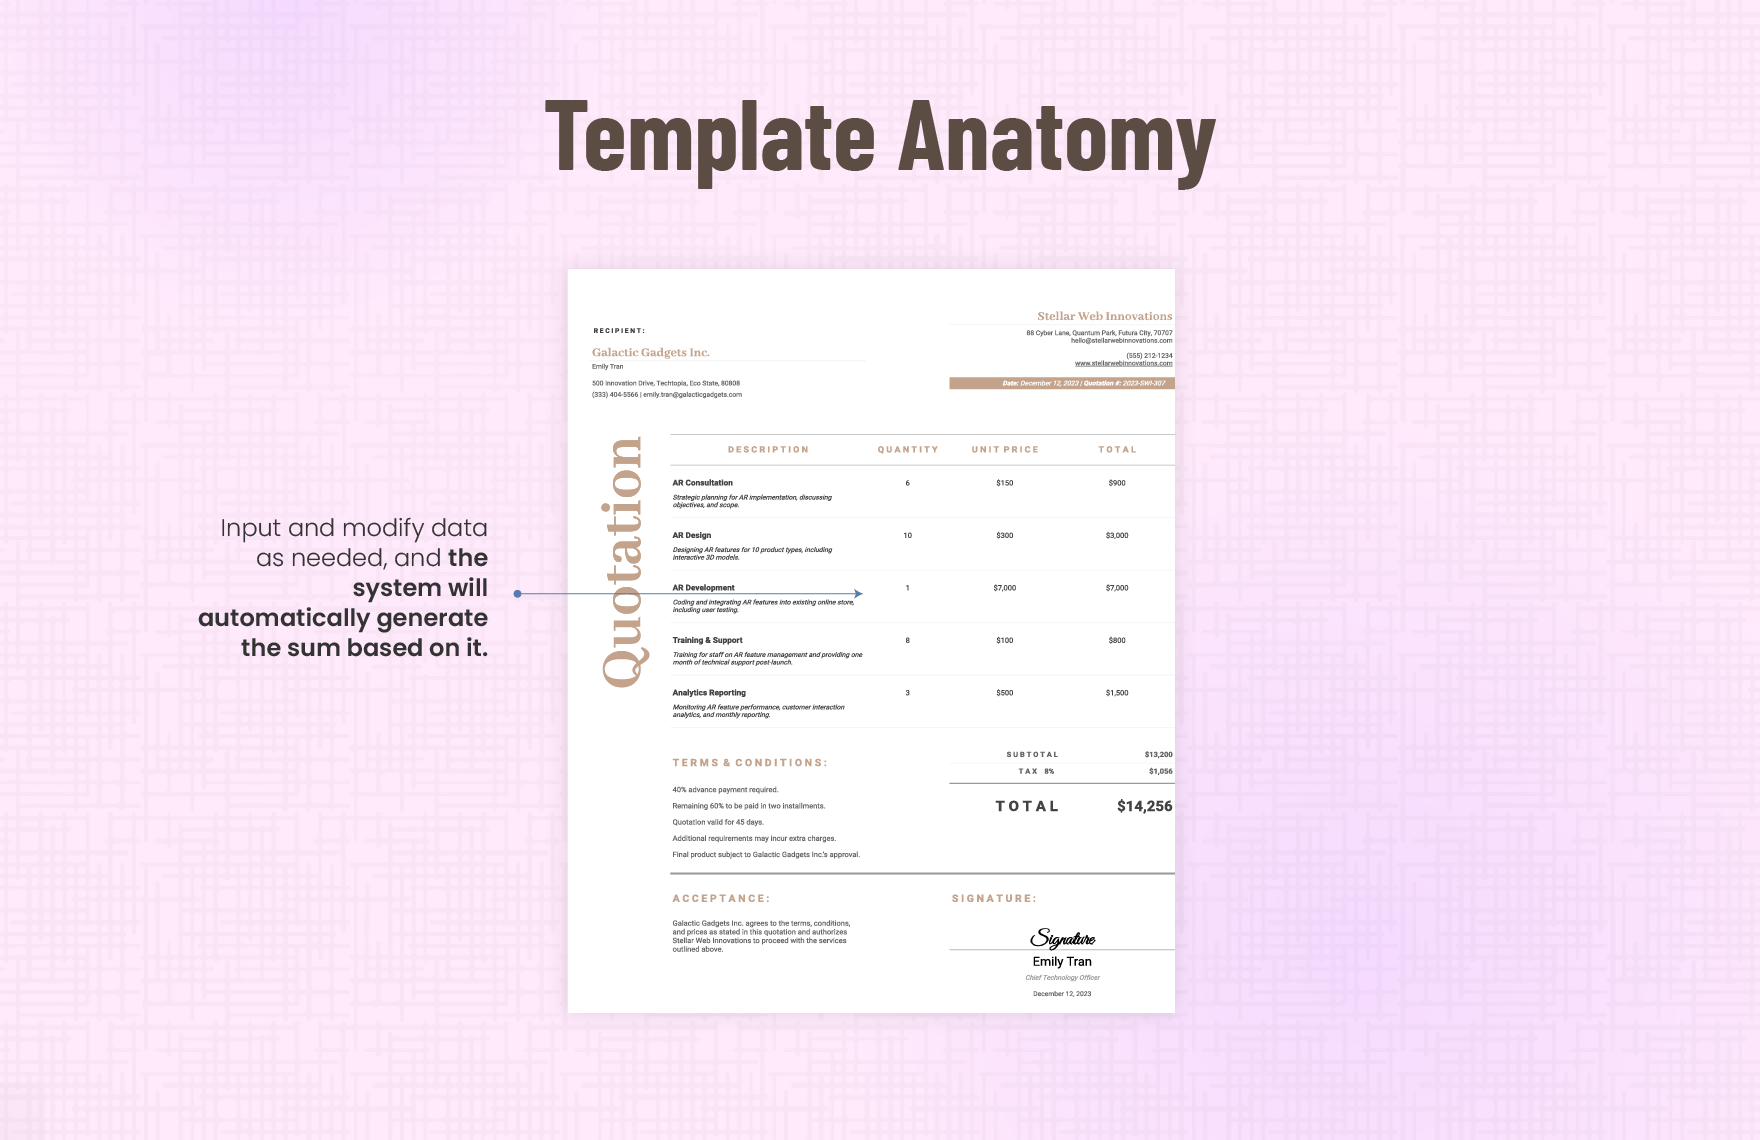 Quotation Form Template